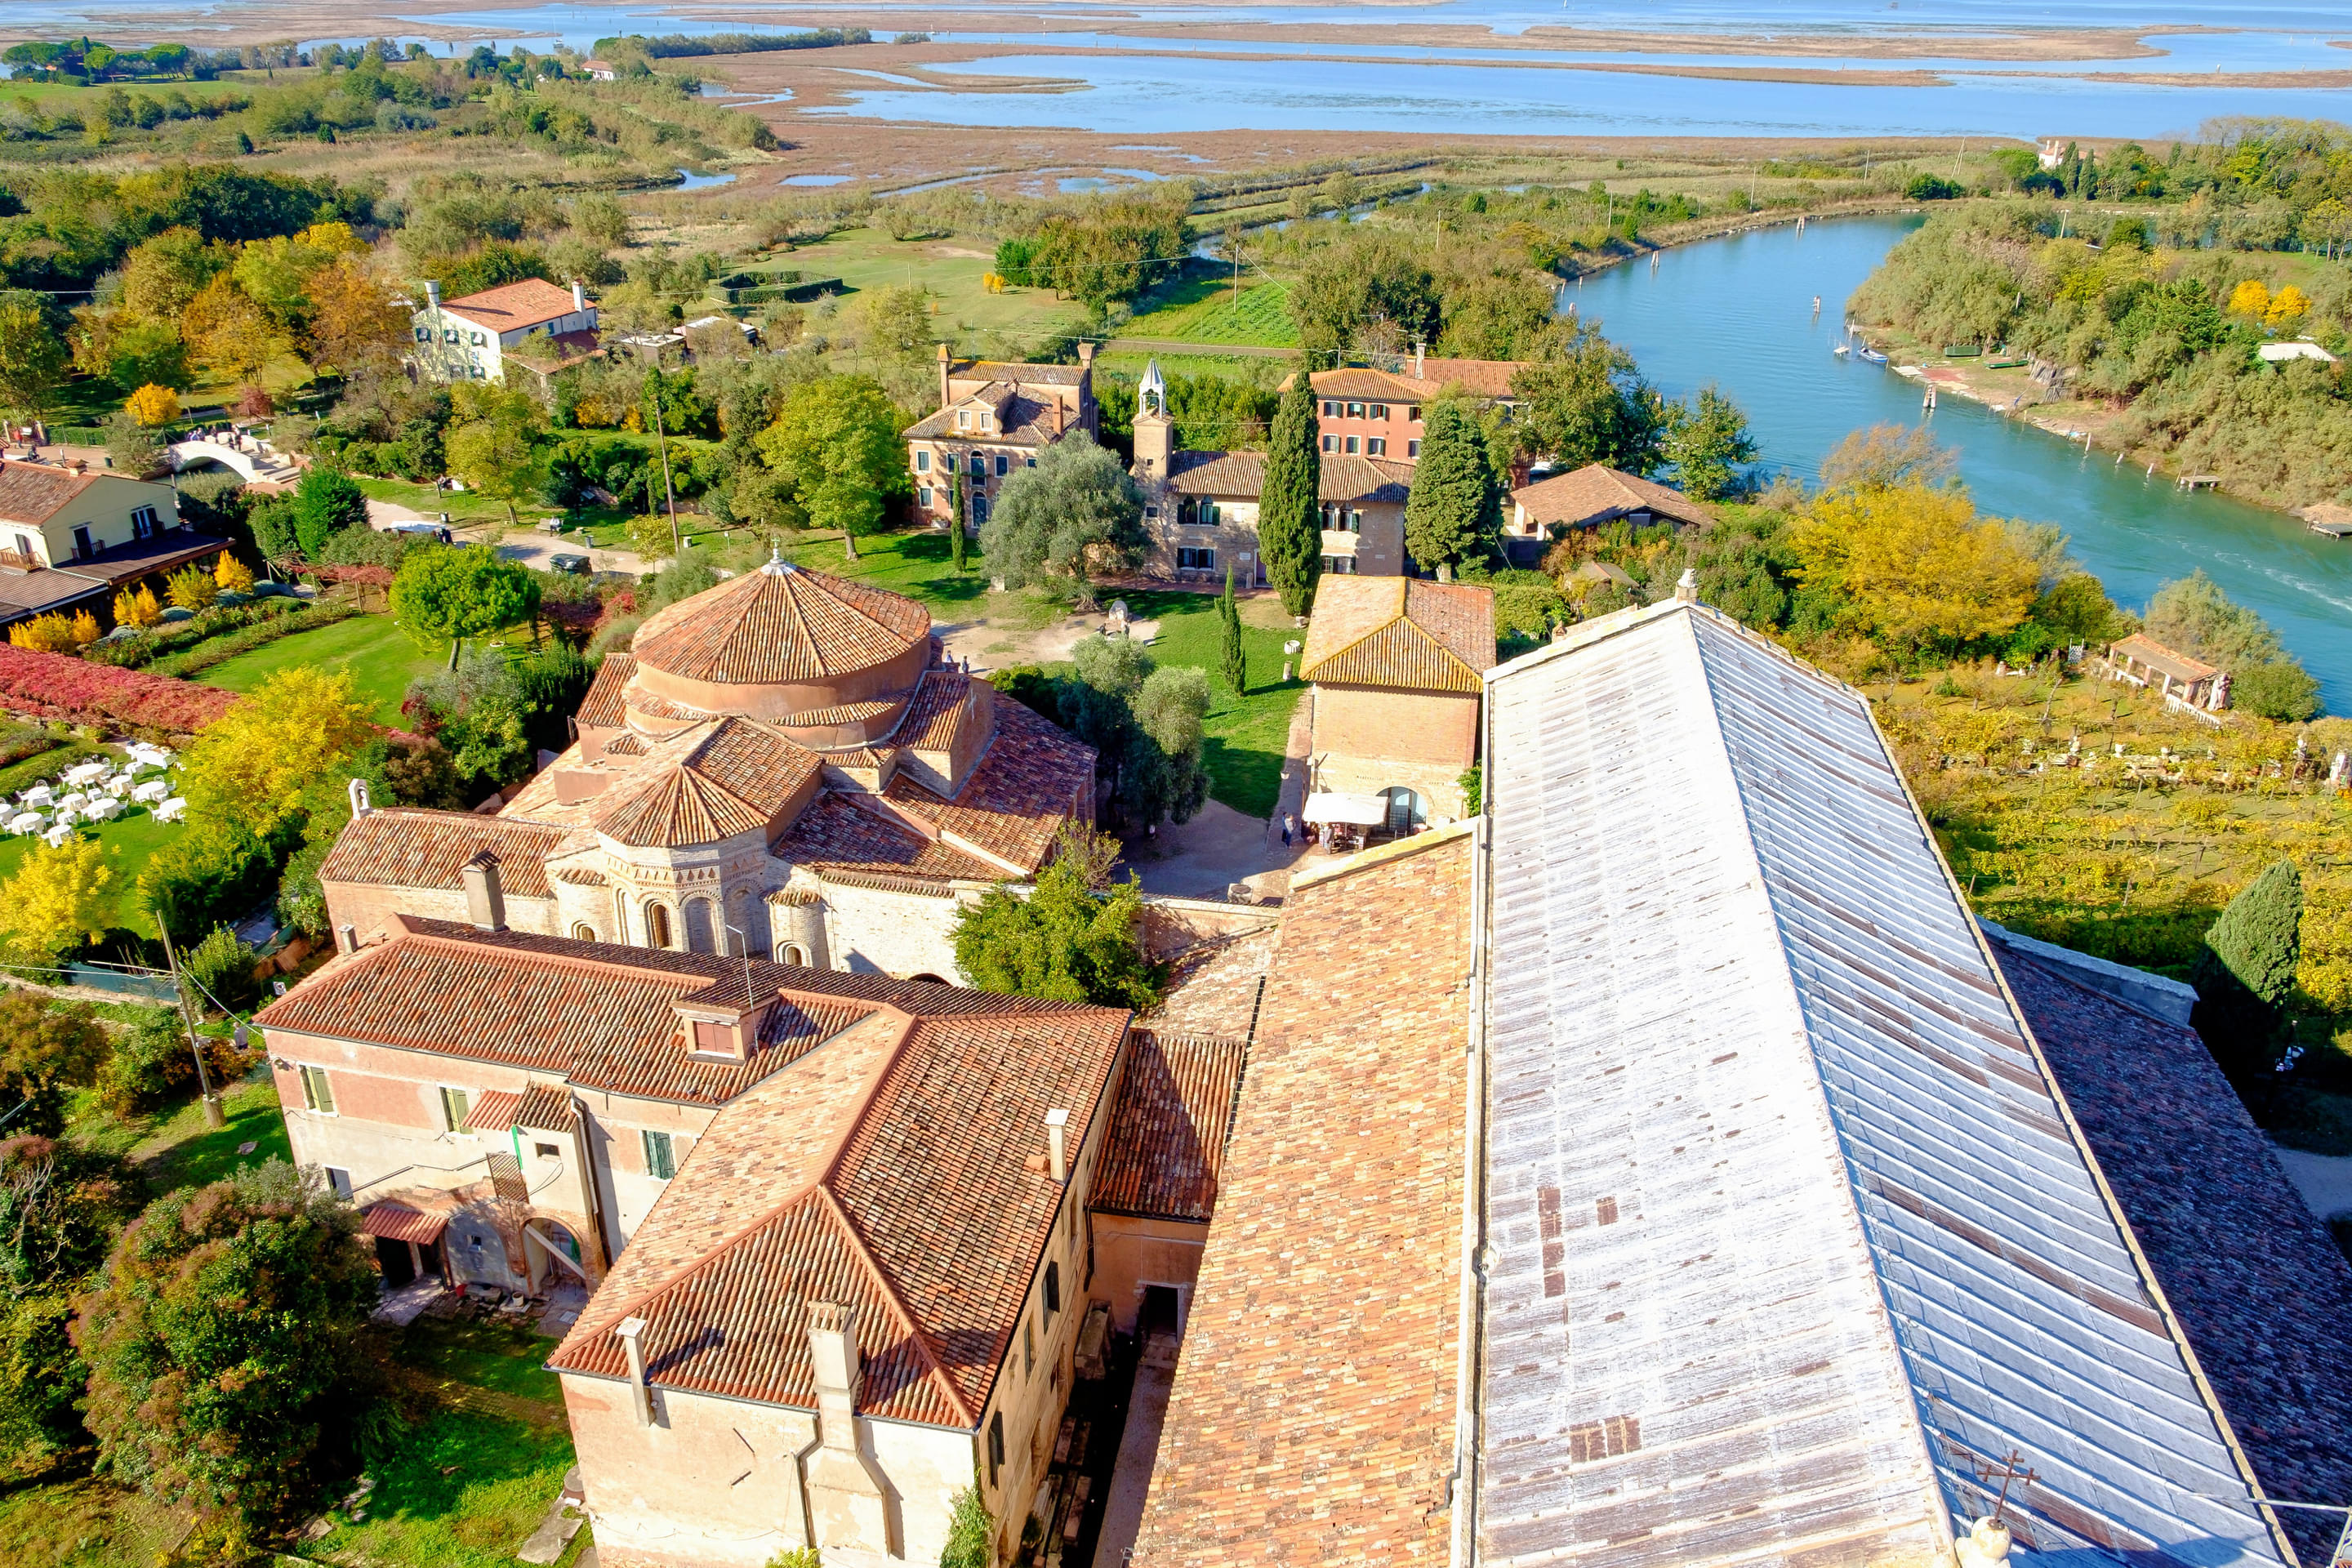 Torcello Island Overview